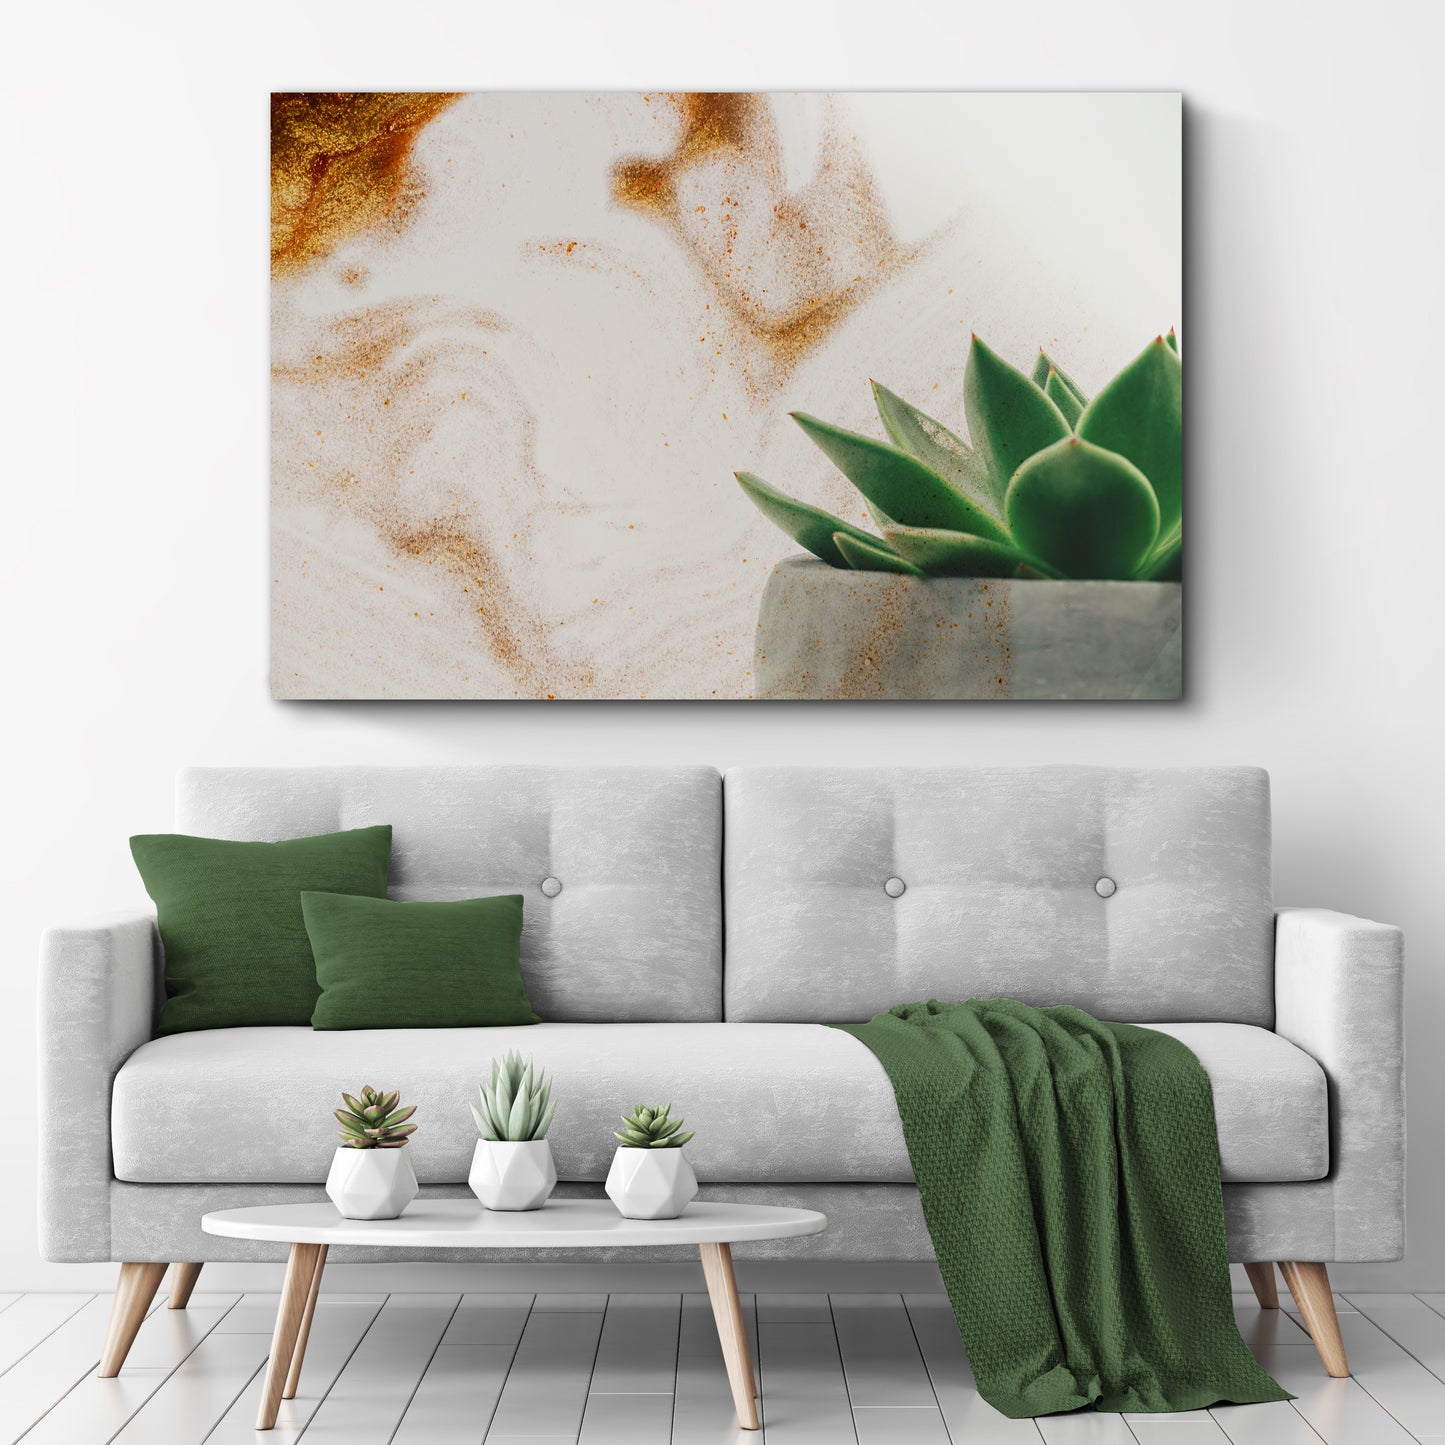 Stone Pot Succulent Plant Canvas Wall Art Style 2 - Image by Tailored Canvases